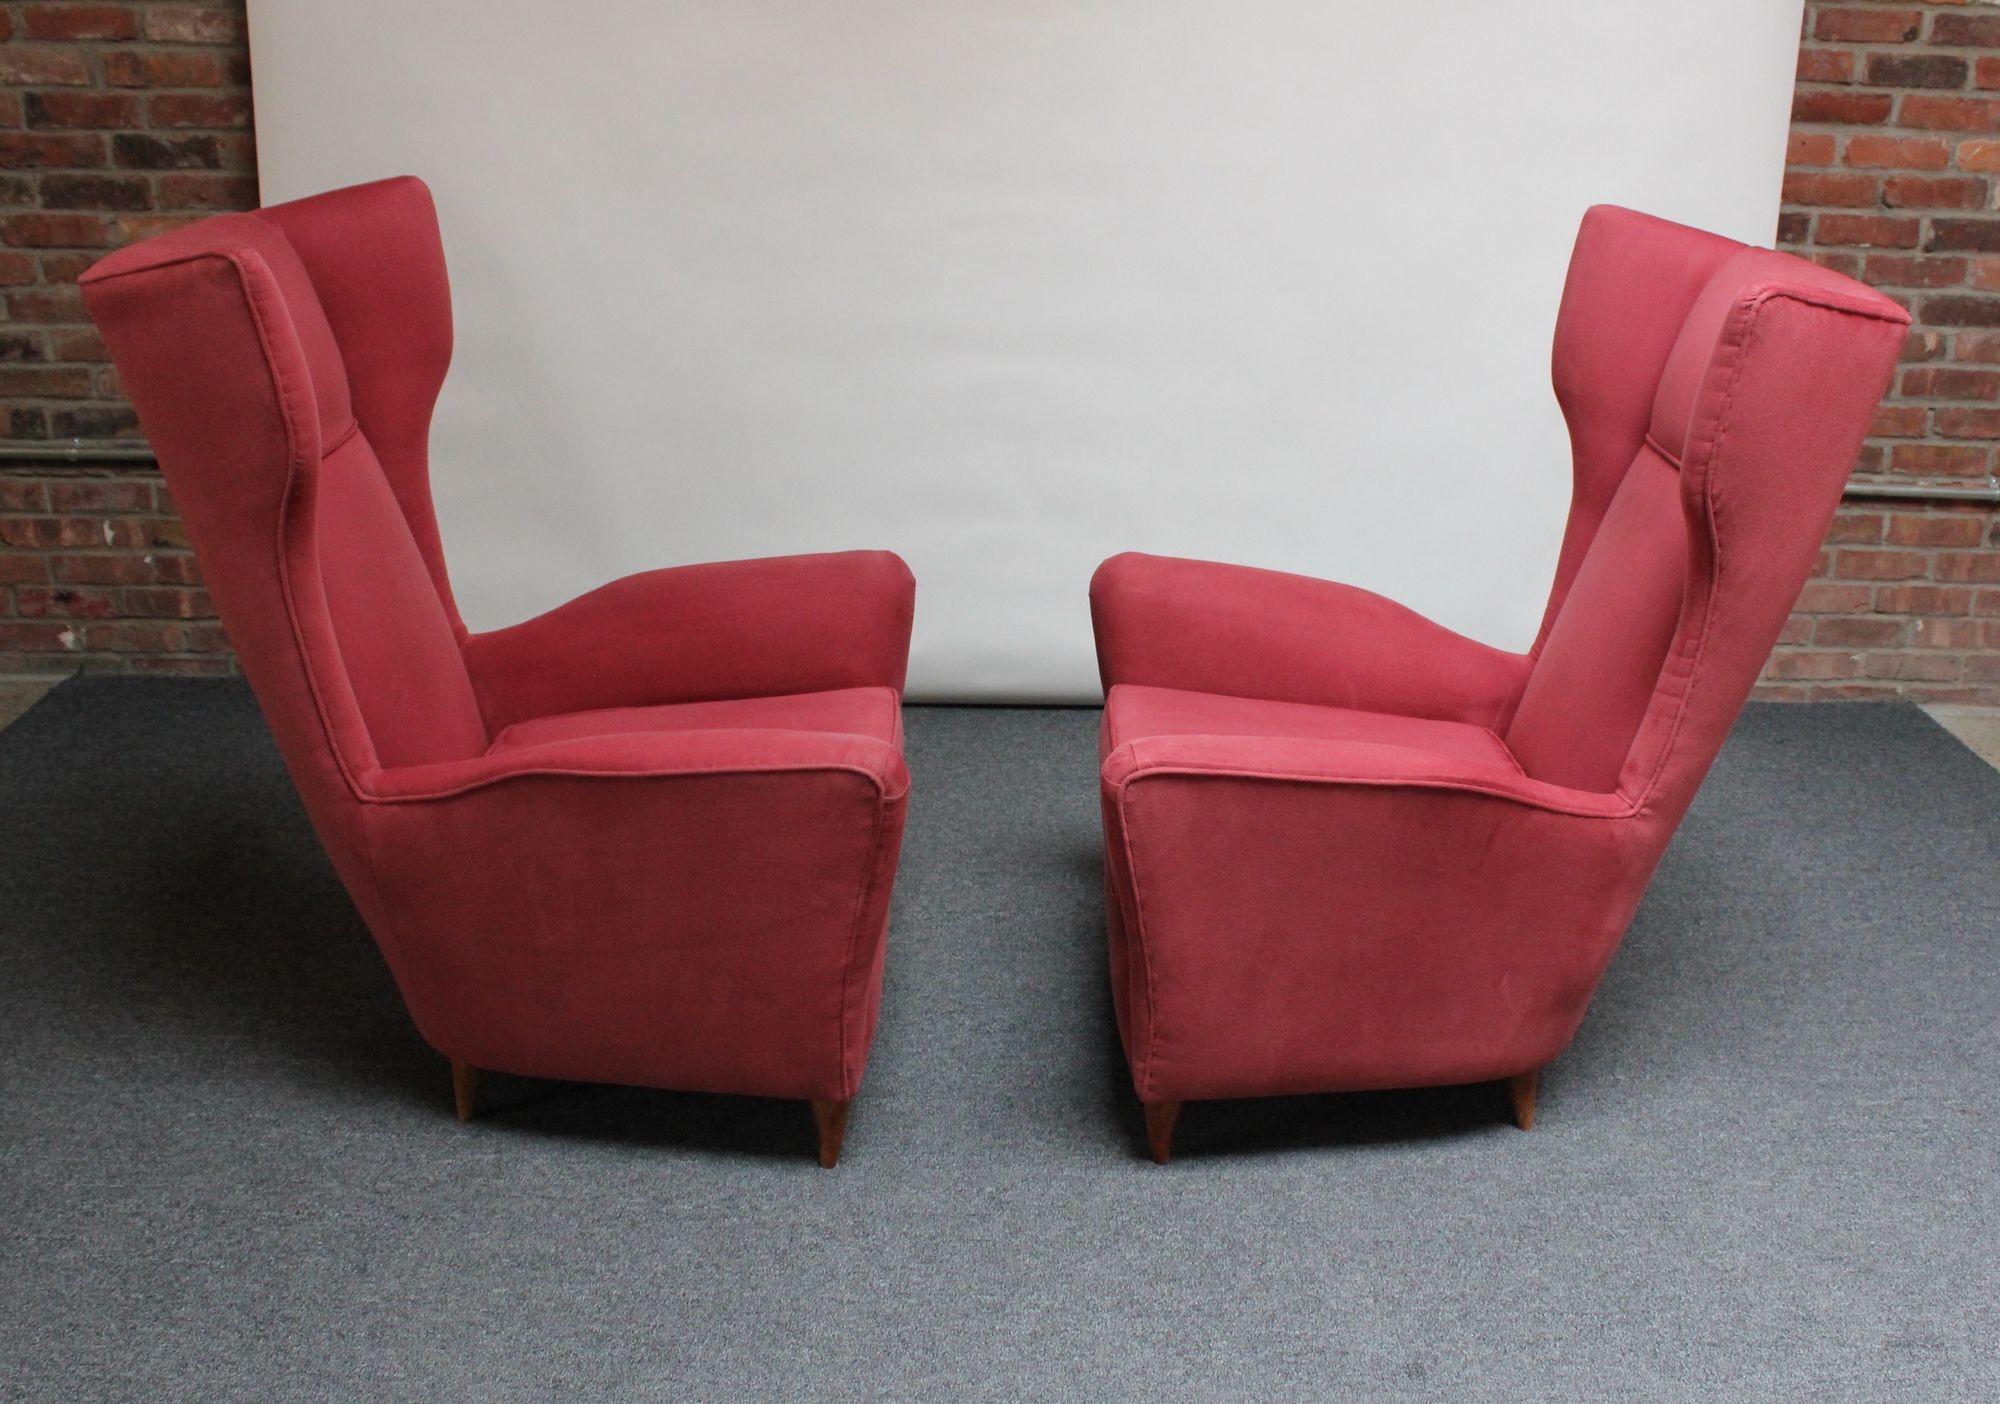 Mid-20th Century Pair of Italian Modernist Wingback Lounge Chairs by Ico Parisi For Sale